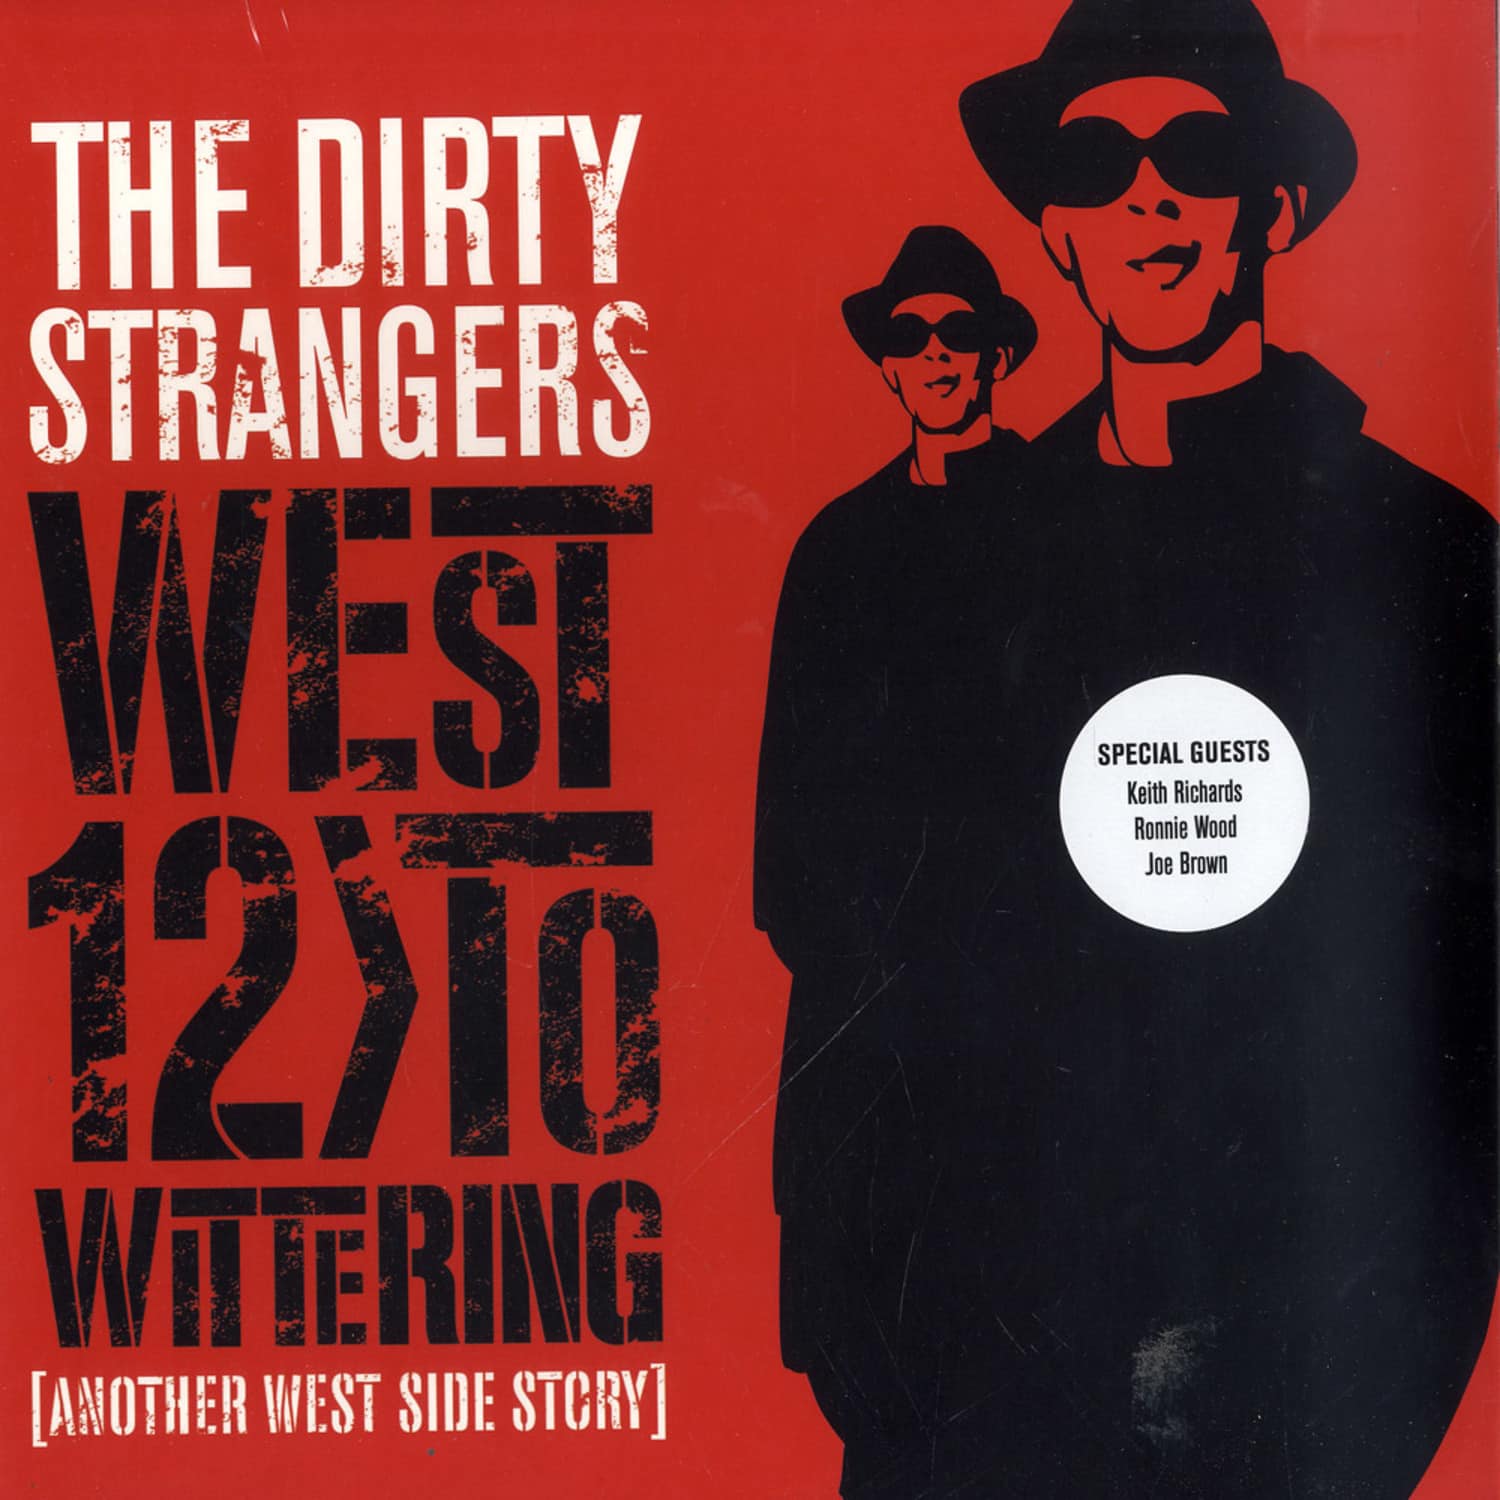 Dirty Strangers - WEST 12 TO WITTERING